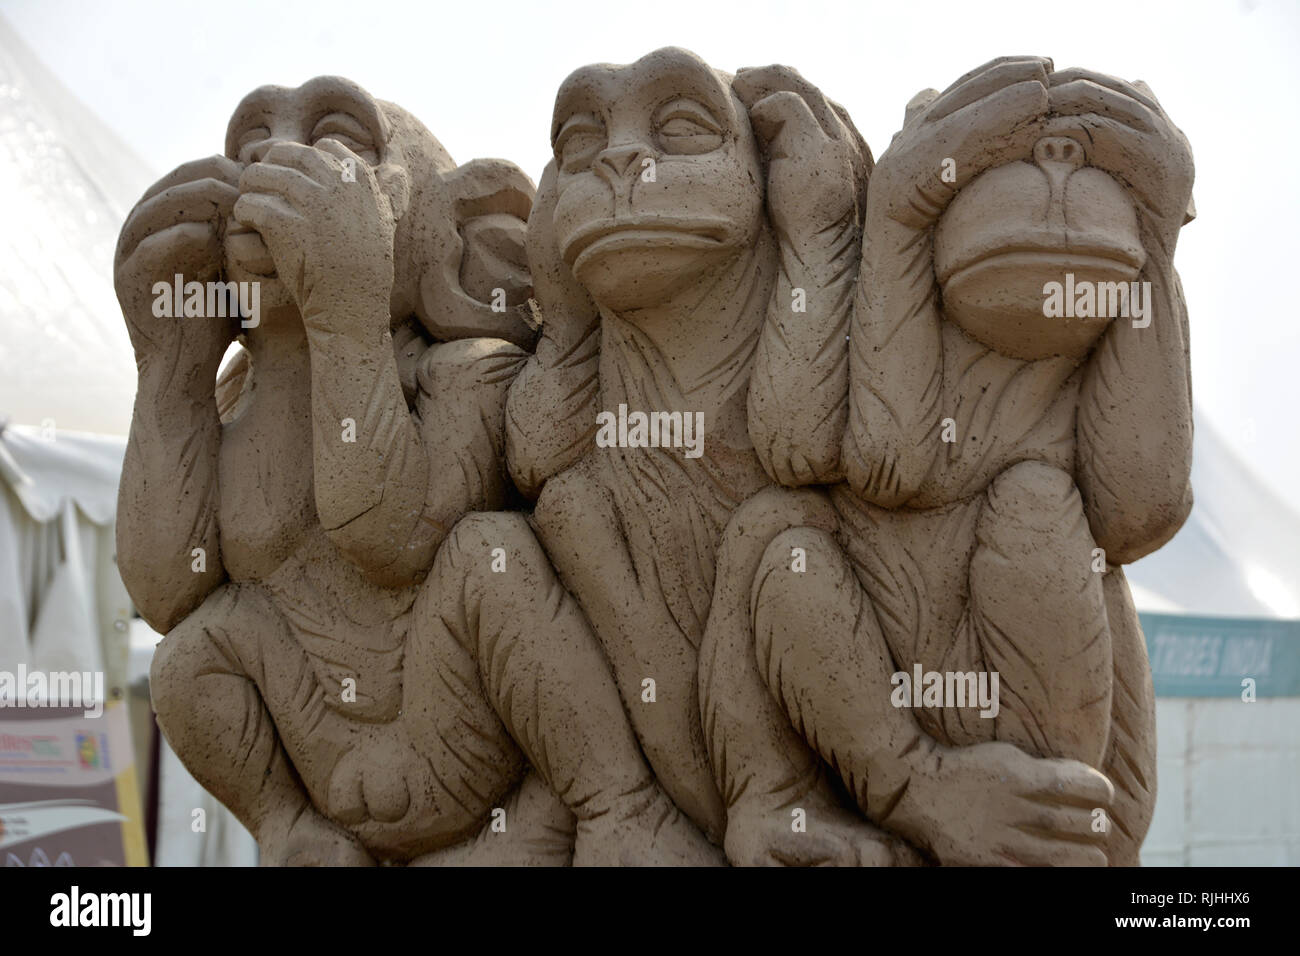 The three wise monkeys are a pictorial maxim, embodying the proverbial principle 'see no evil, hear no evil, speak no evil'. Stock Photo